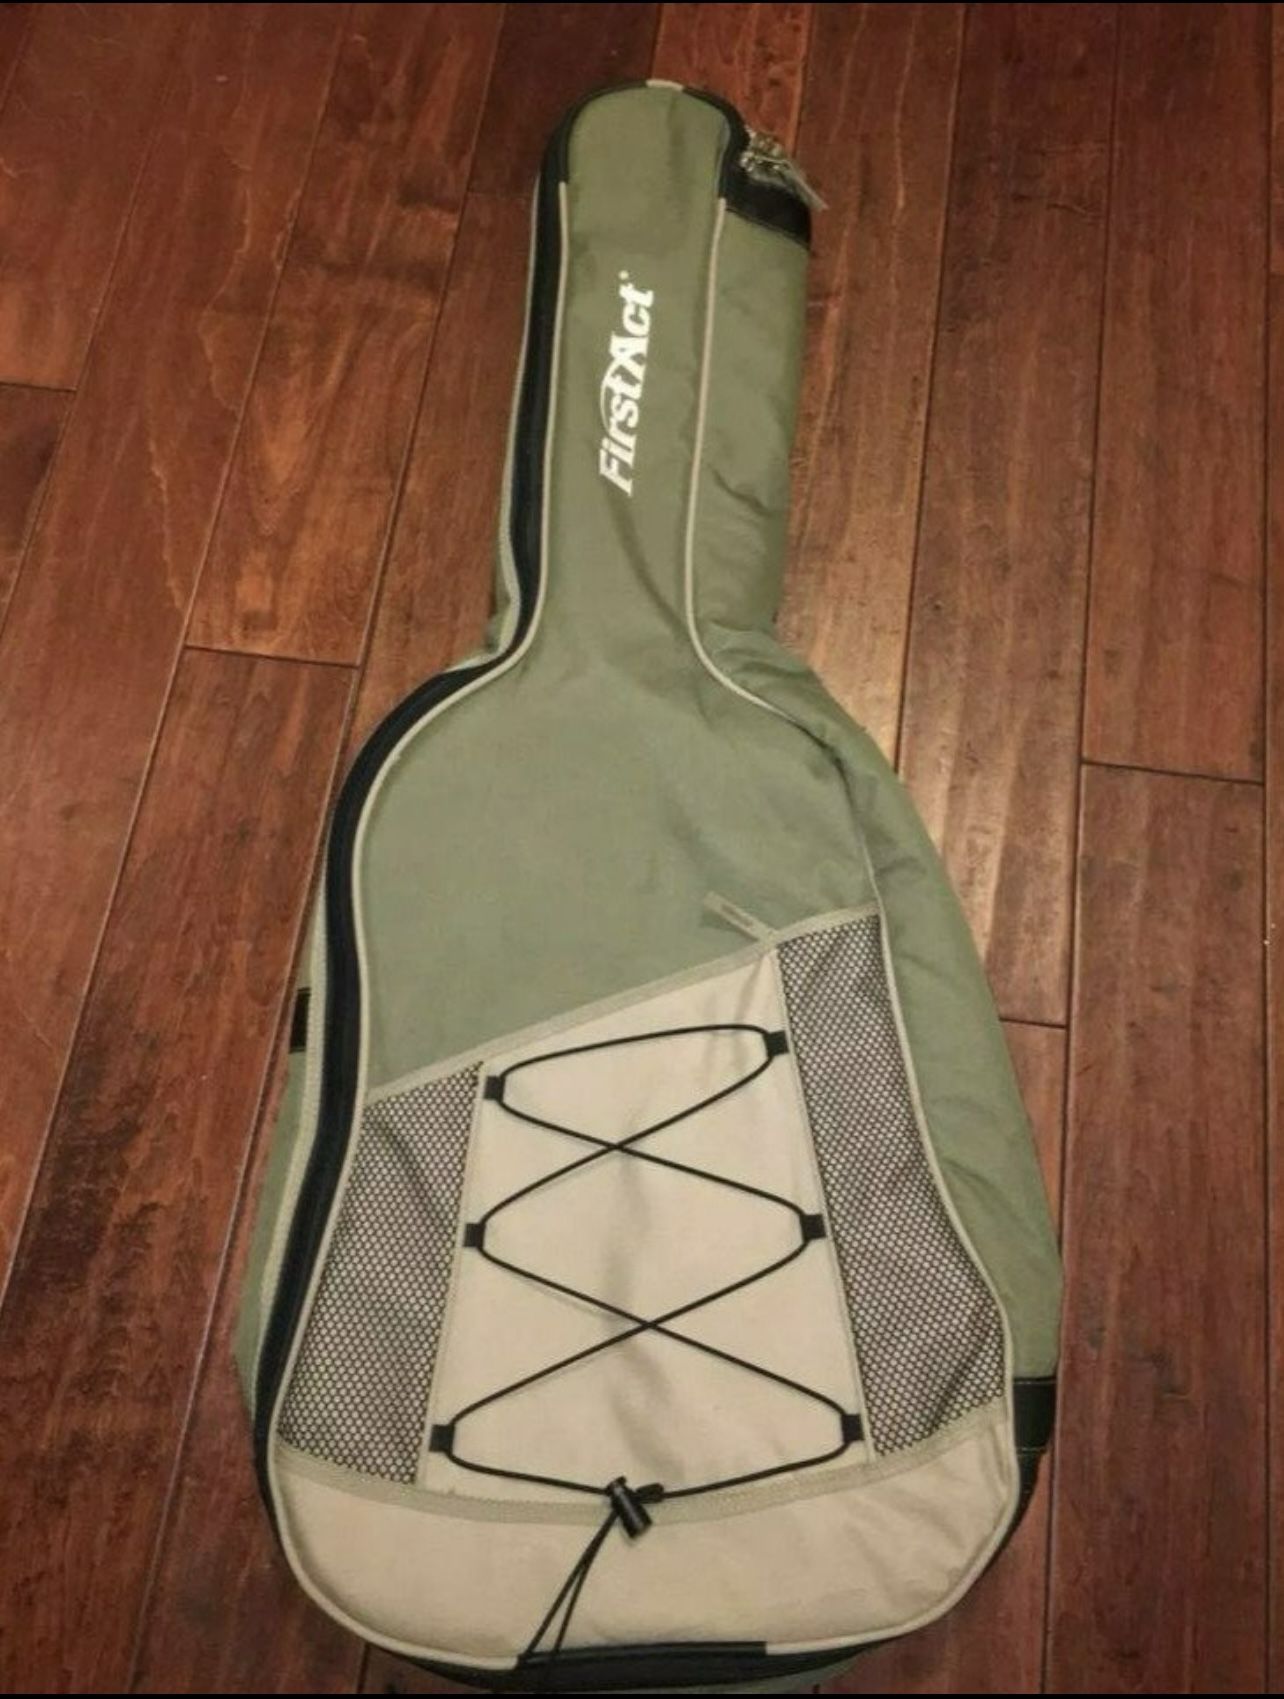 FIRST ACT 38” Soft Guitar Bag, Backpack with Shoulder Straps, Green (Good condition) PICK UP IN CORNELIUS